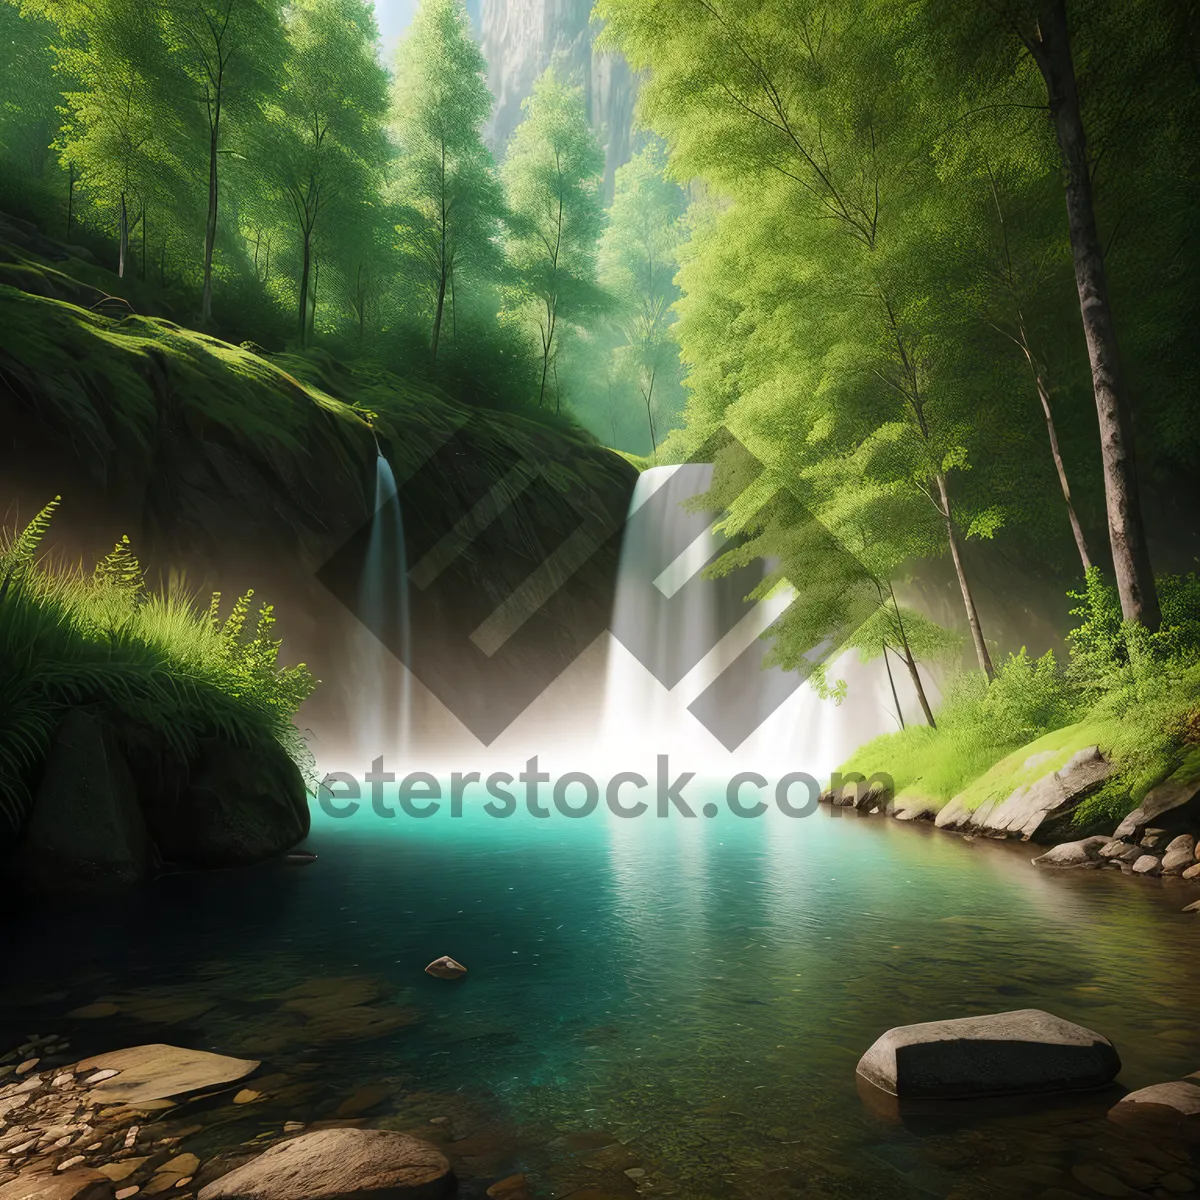 Picture of Serene River Cascade Through Forest